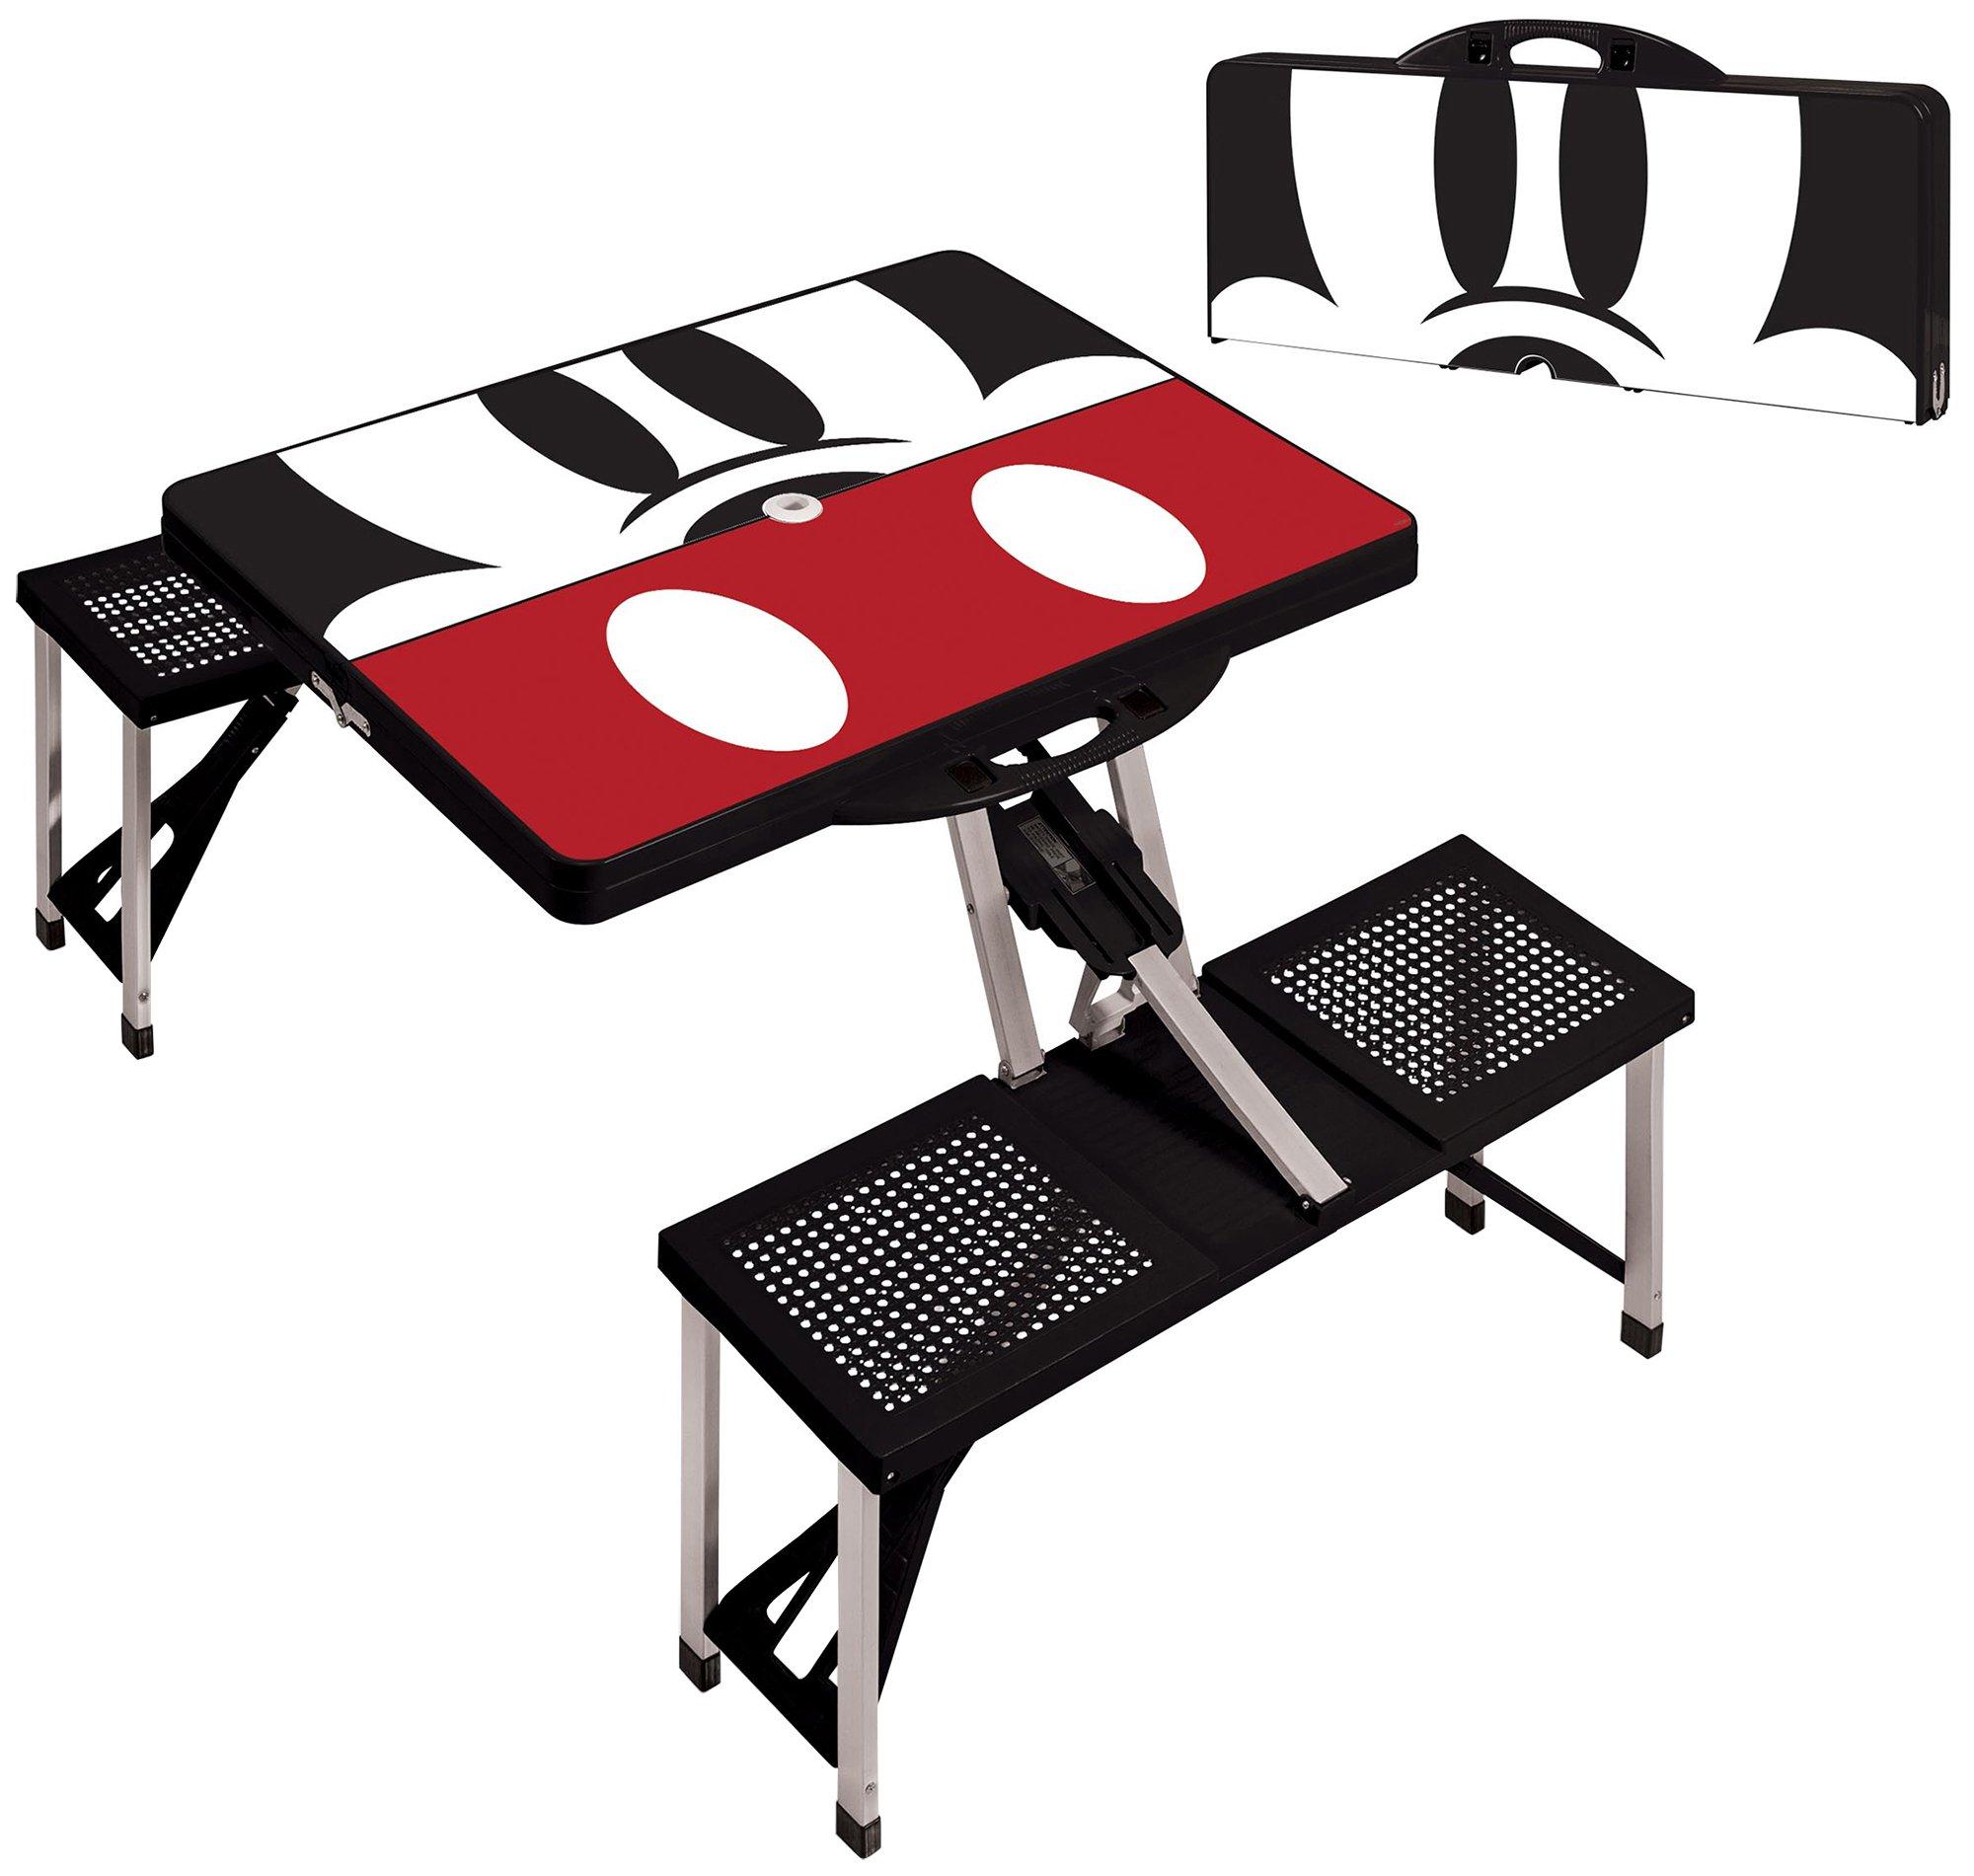 Mickey Mouse Picnic Table Sport Folding Table